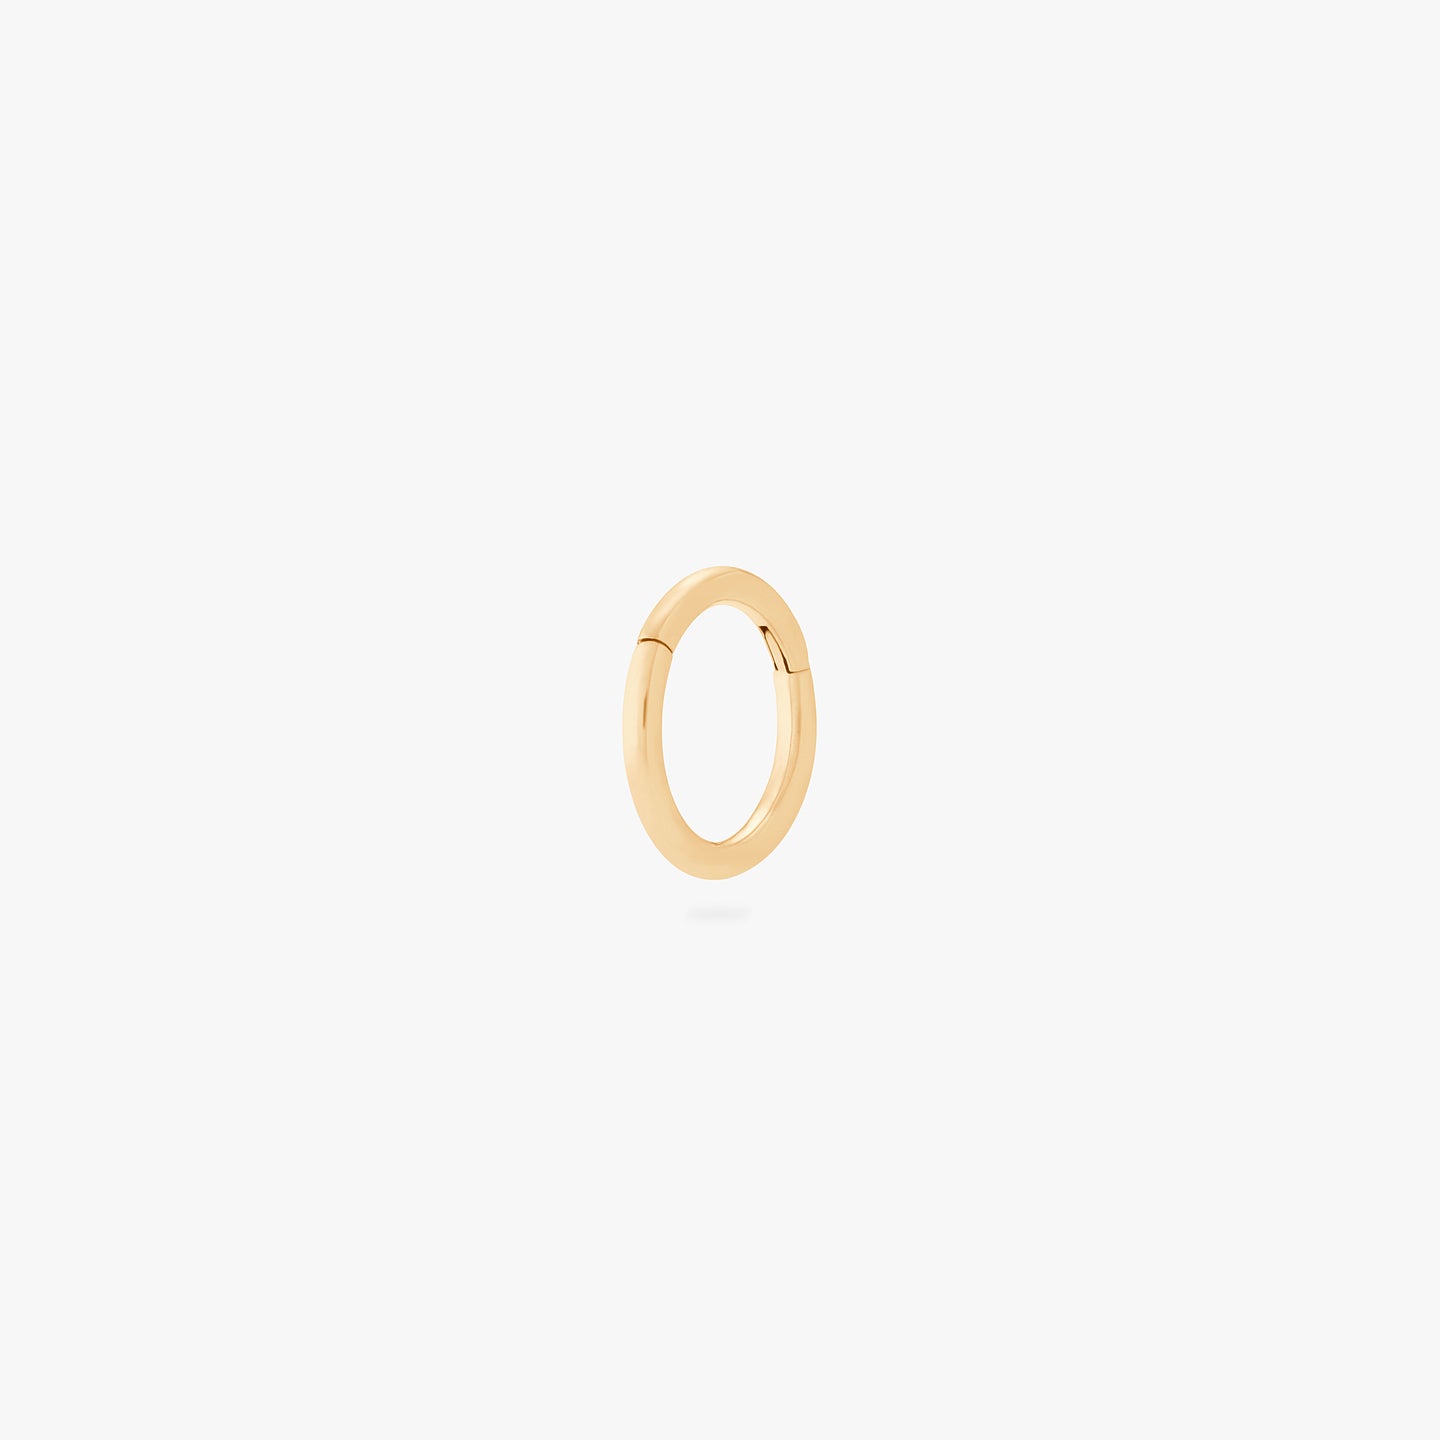 This is an image of a gold clicker with a 6mm inner diameter. color:null|gold